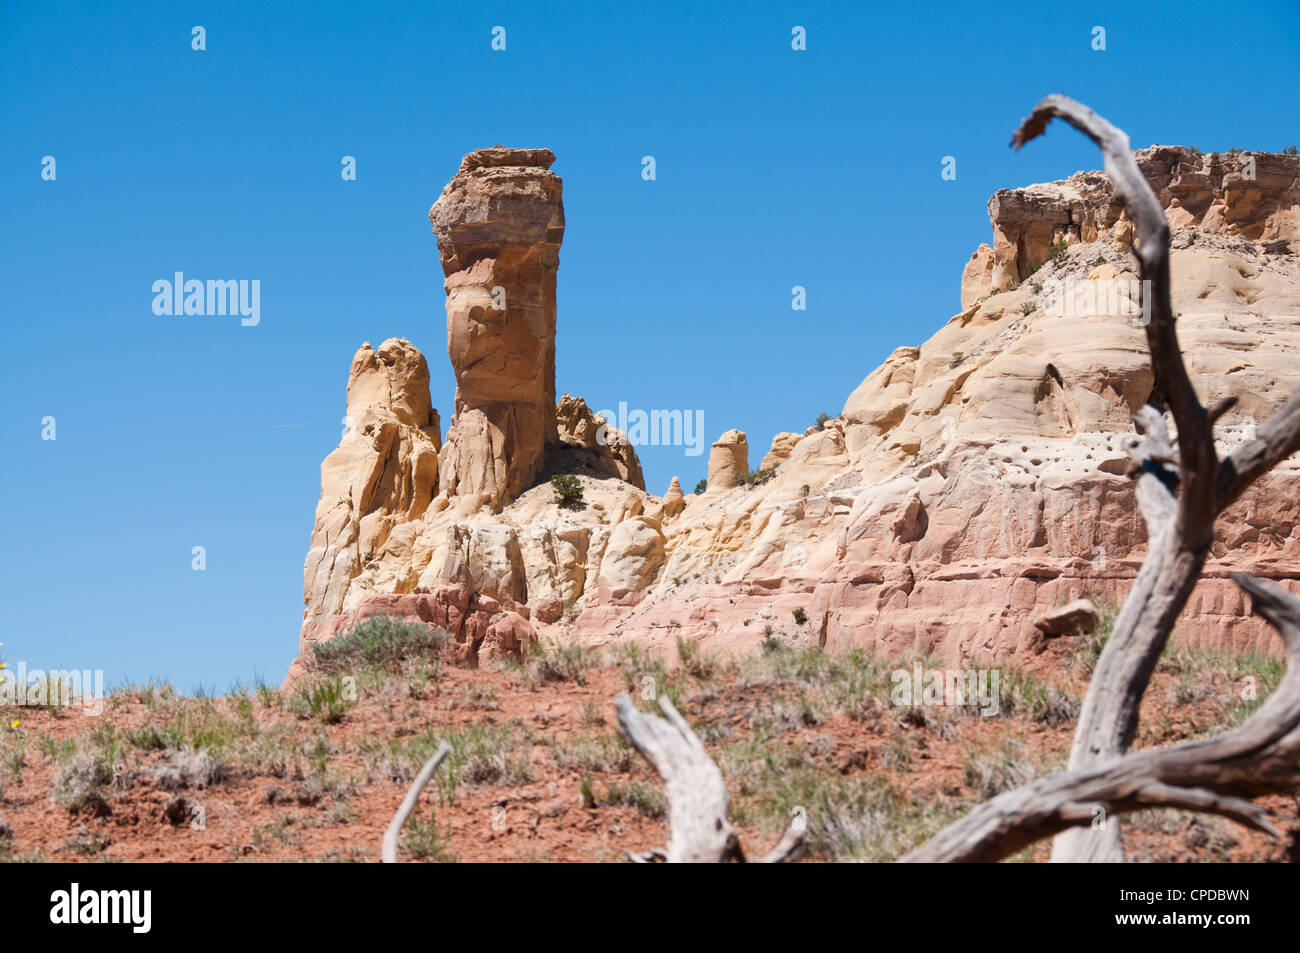 Chimney rock rocce ghost ranch Abiquiu Nm Foto Stock